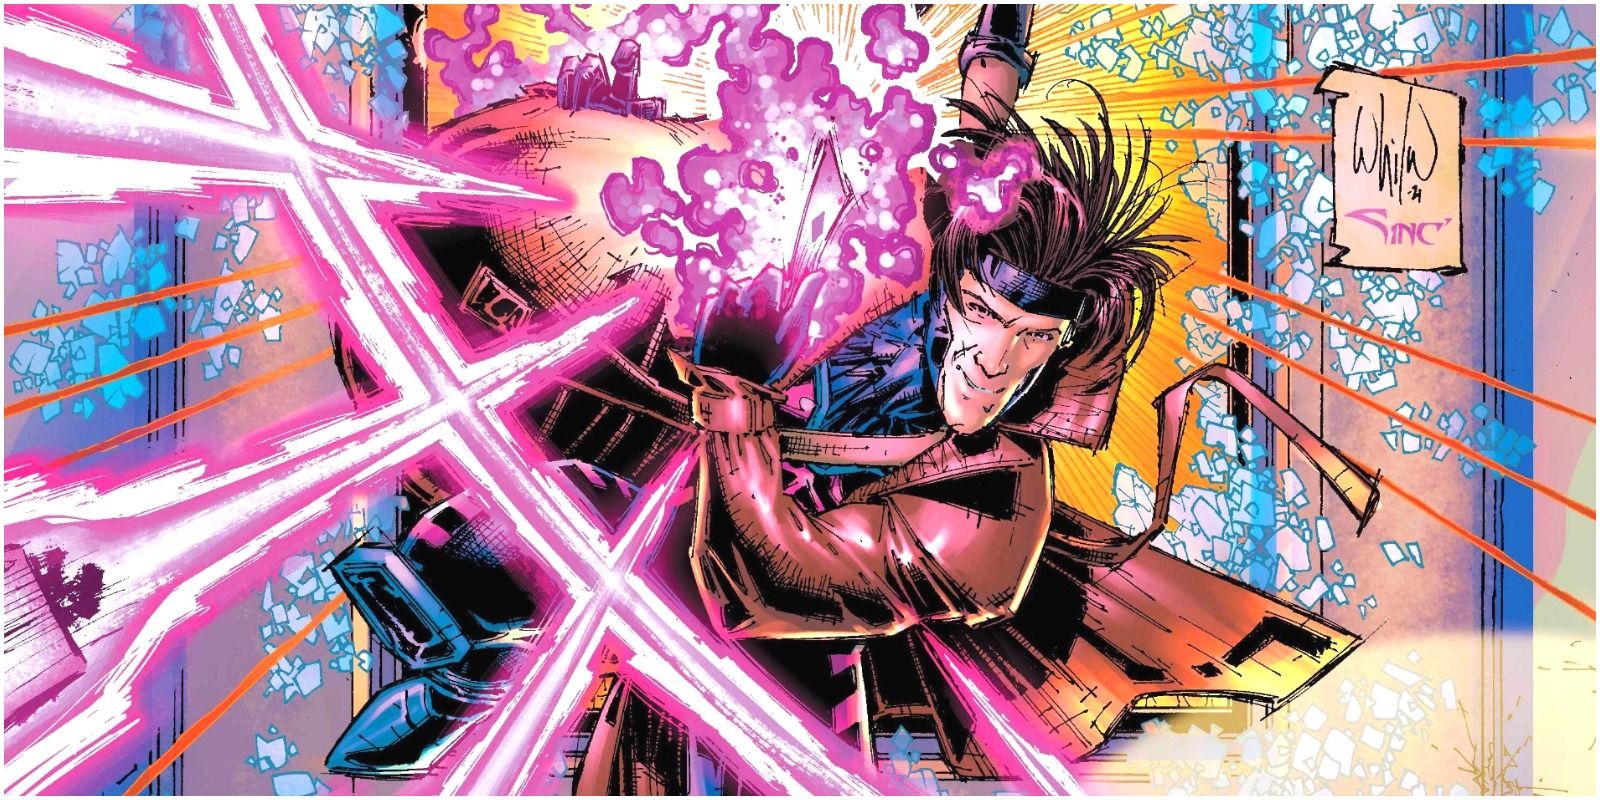 Gambit throwing his kinetic cards